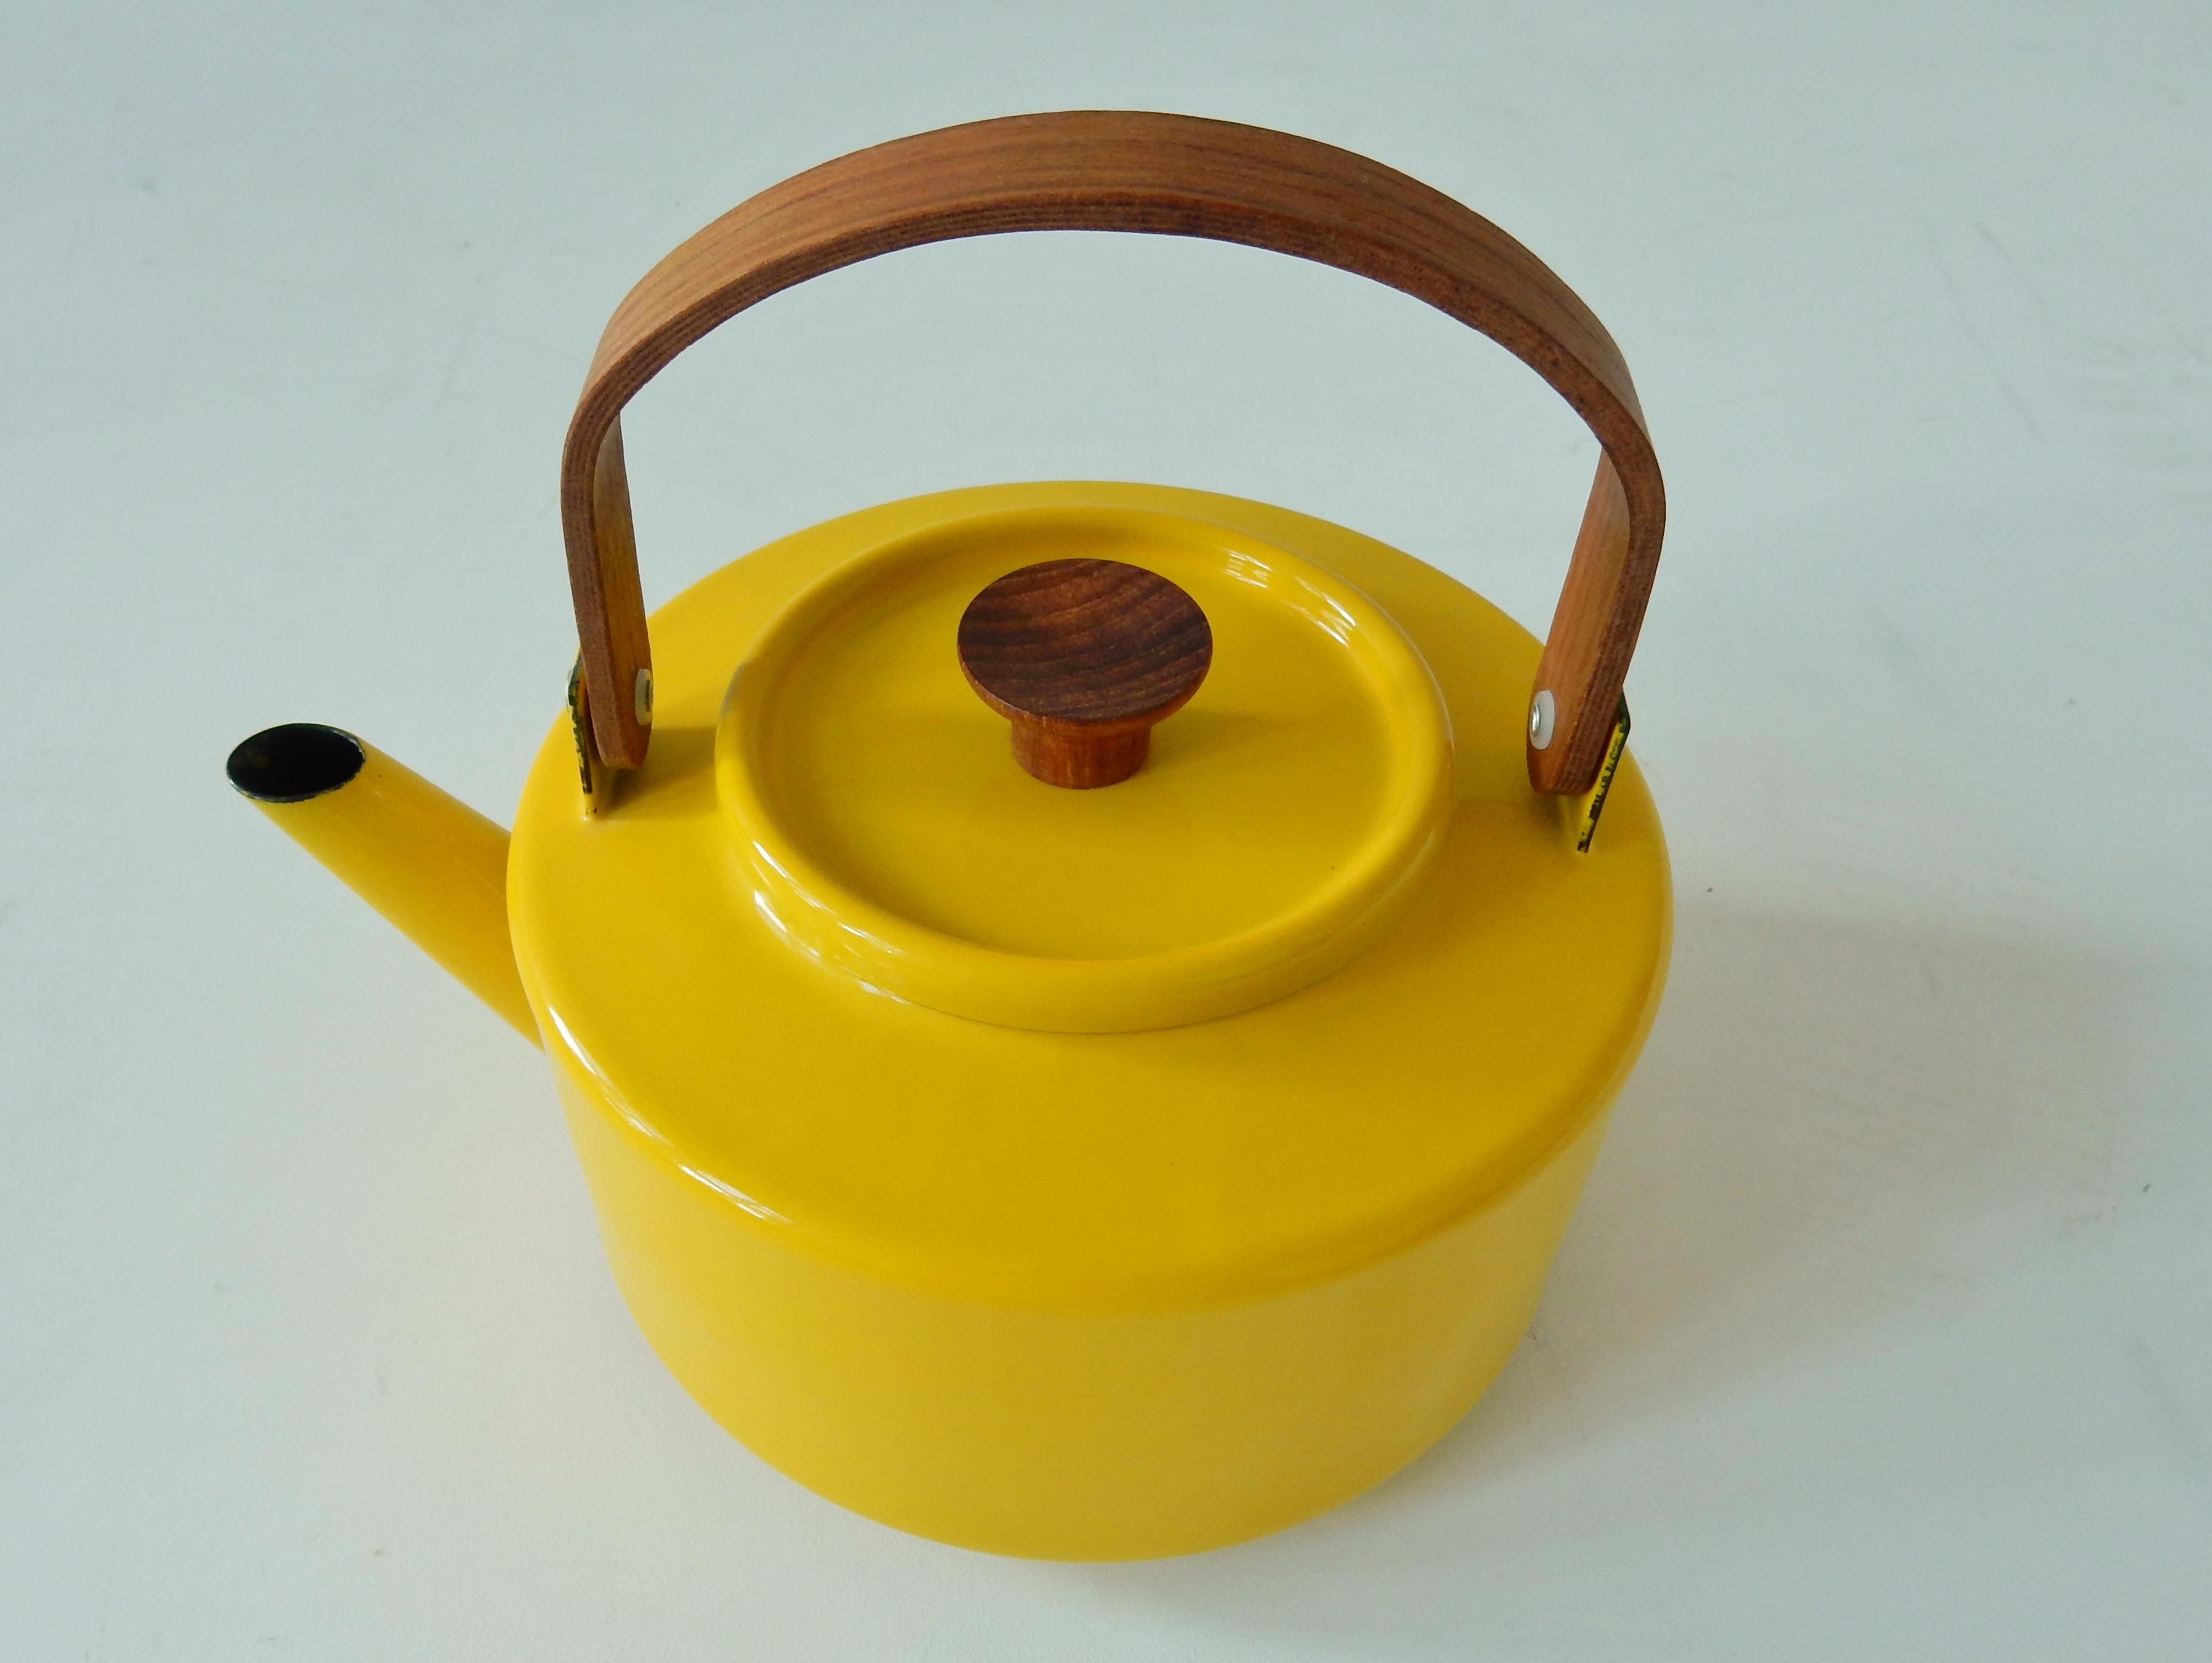 https://a.1stdibscdn.com/enameled-yellow-teapot-by-michael-lax-for-copco-spain-1960-for-sale-picture-2/f_18803/1531826481959/DSCN7273_kopie_master.JPG